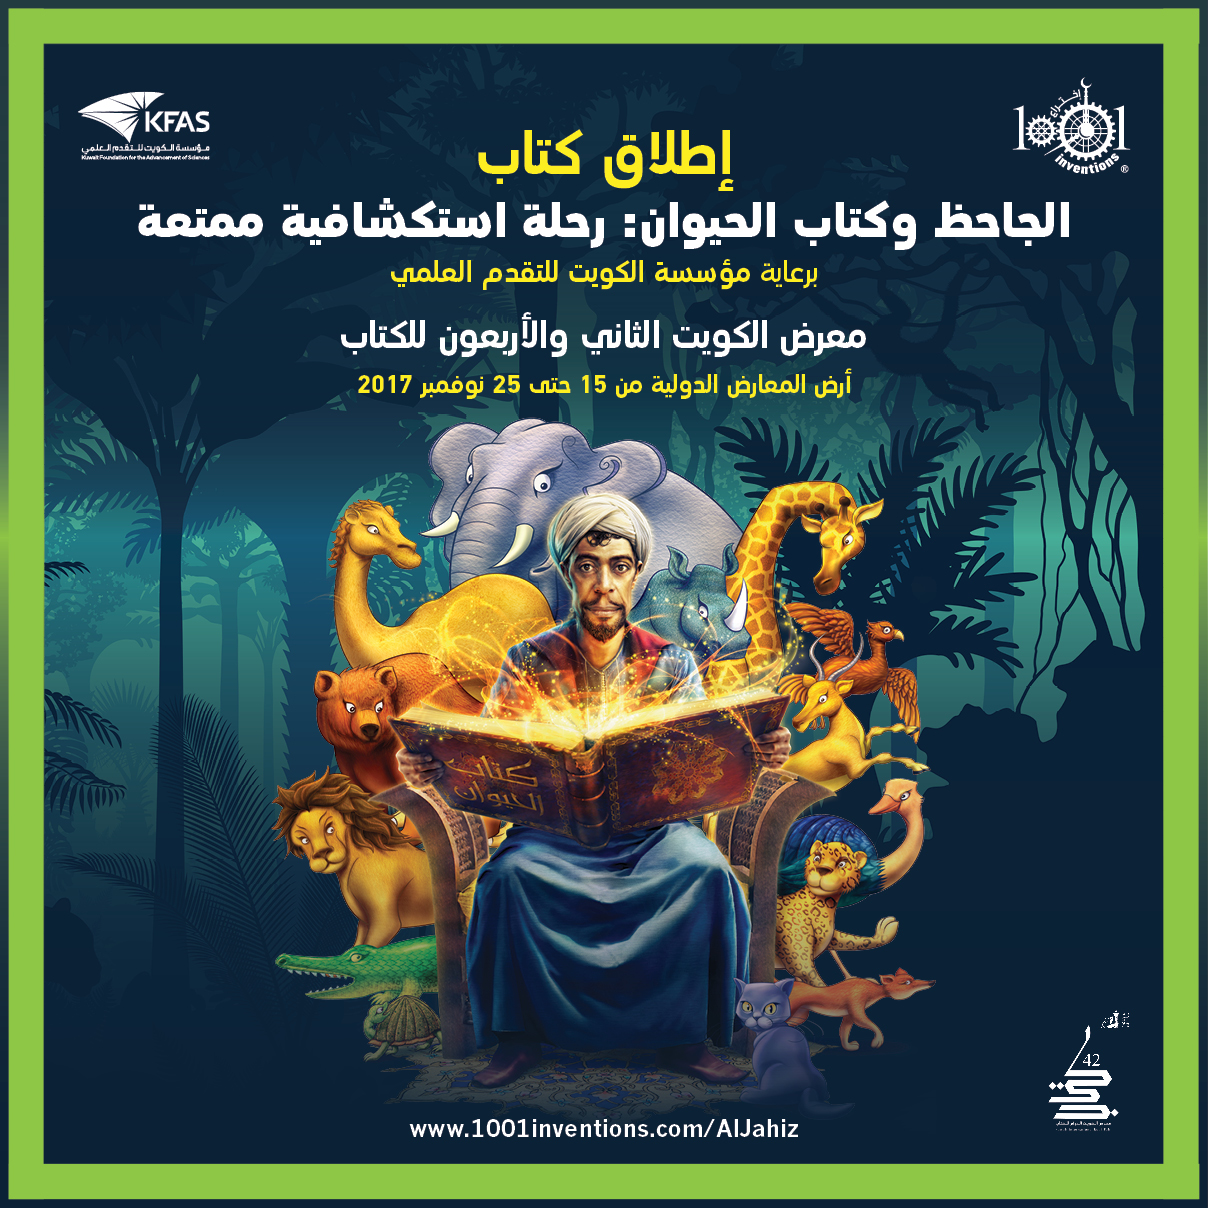 Al-Jahiz and the Book of Animals at the Kuwait Book Fair